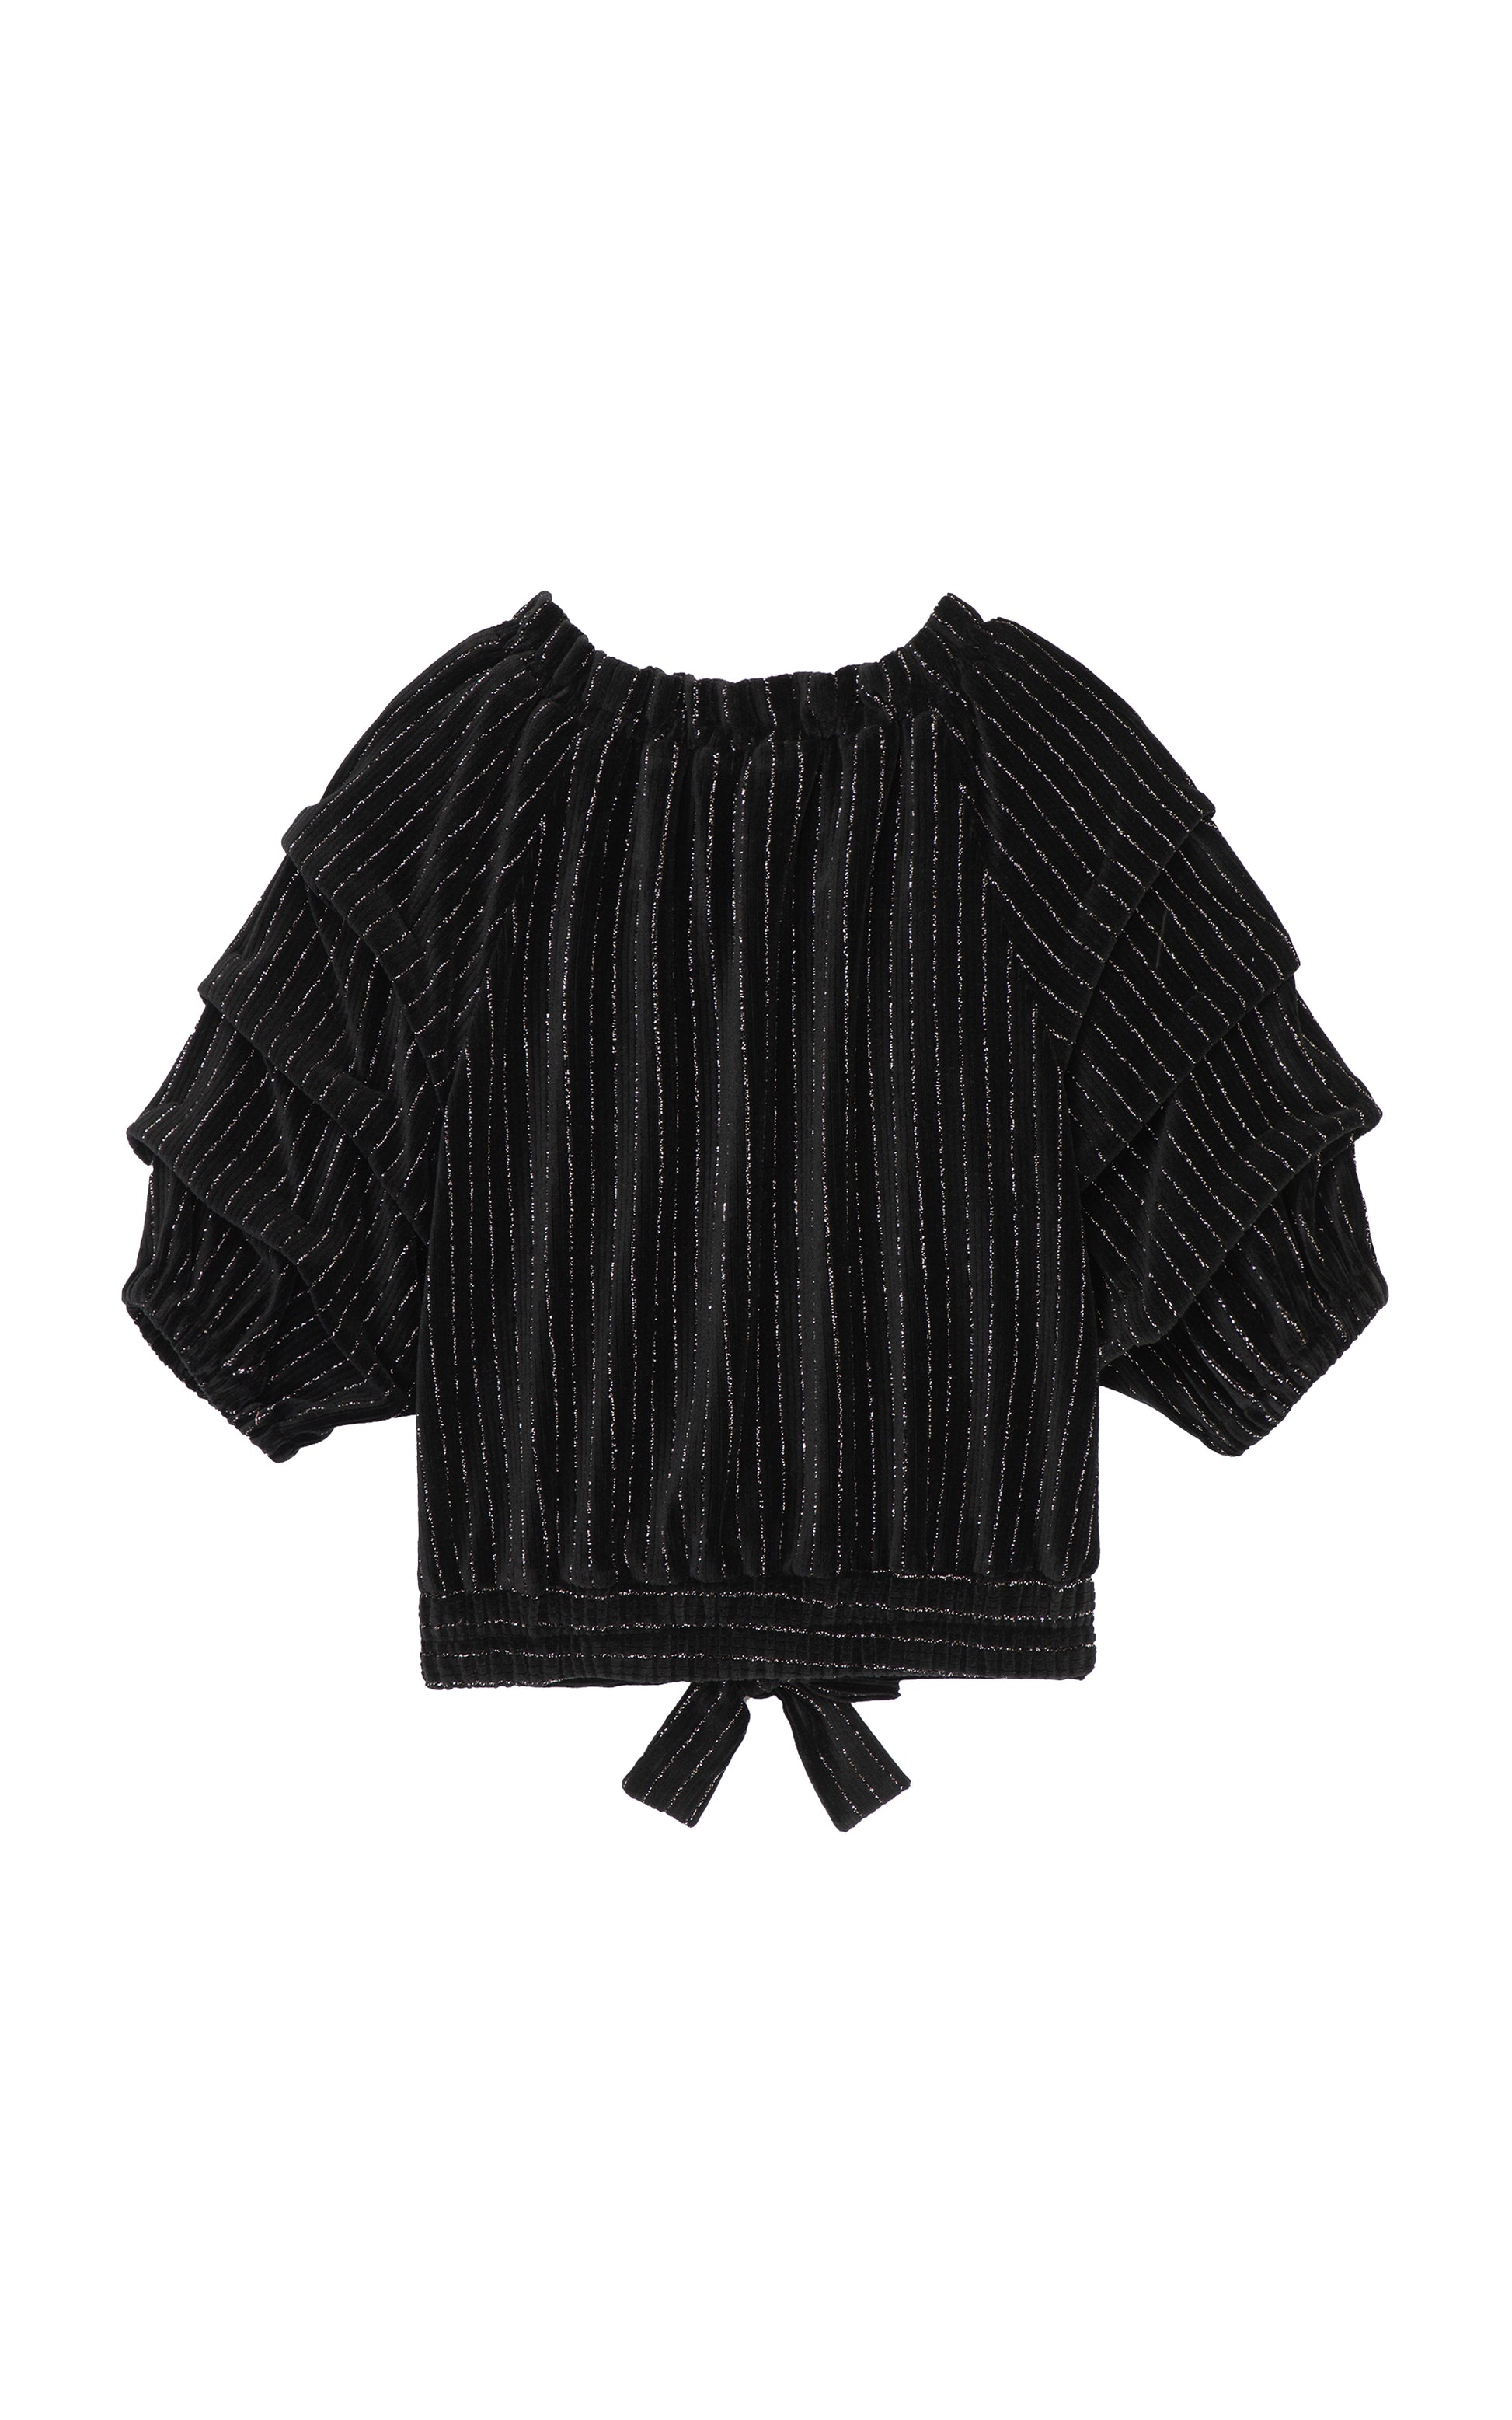 Back view of black velour gathered sleeves top with metallic stripes